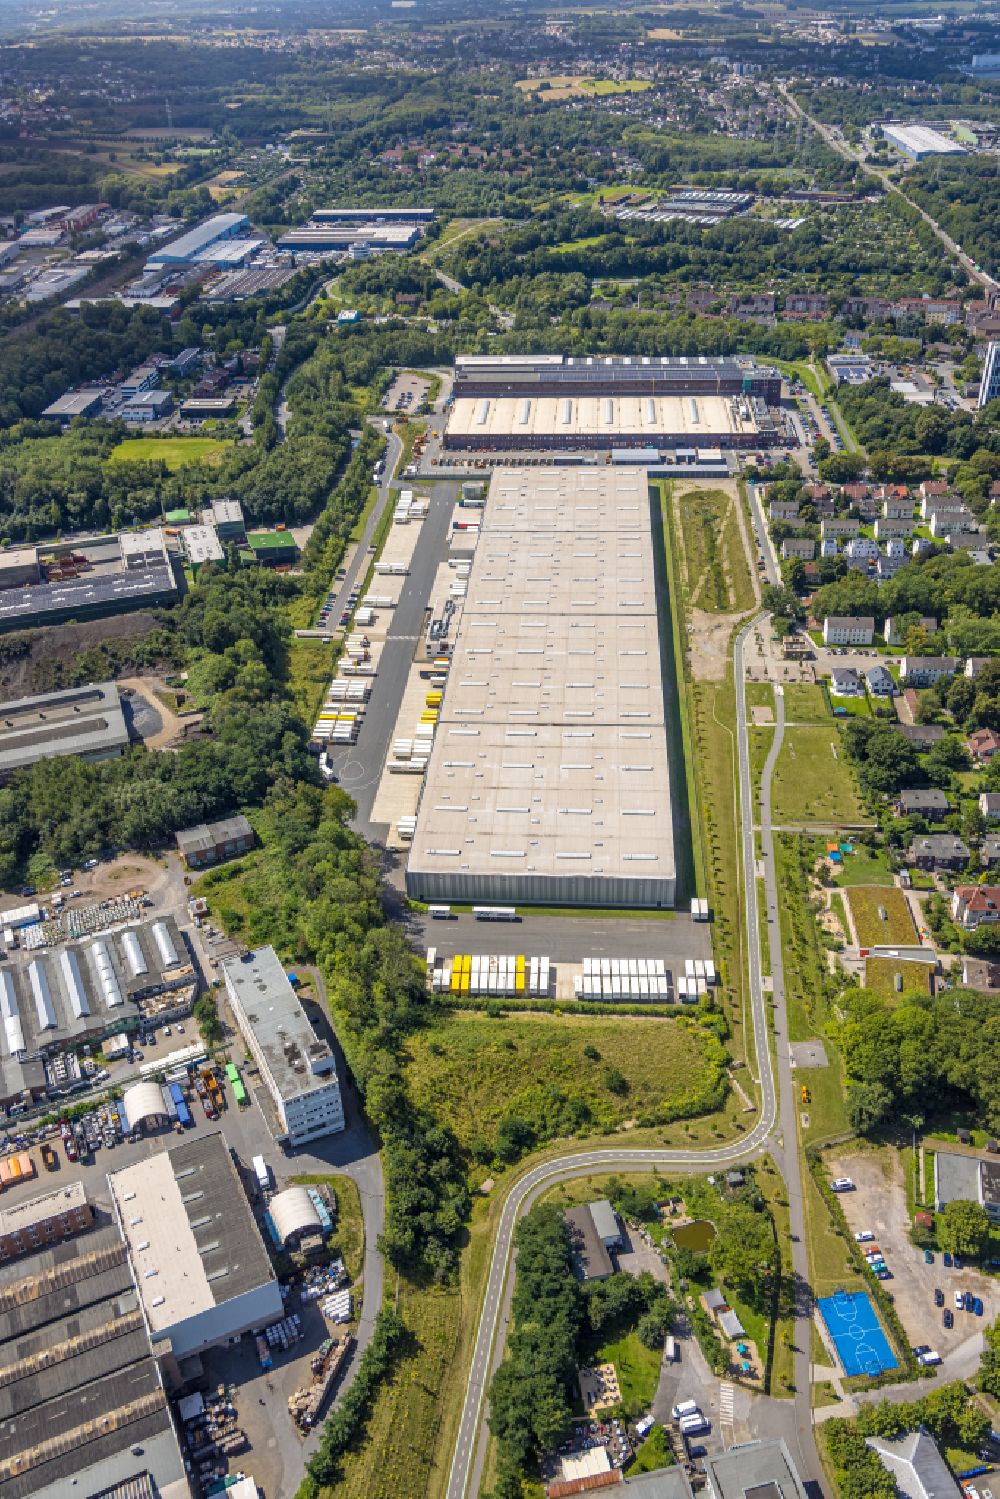 Aerial image Bochum - Warehouses and forwarding building of DSV Stuttgart GmbH & Co. KG Obere Stahlindustrie in the district Wiemelhausen in Bochum in the state North Rhine-Westphalia, Germany